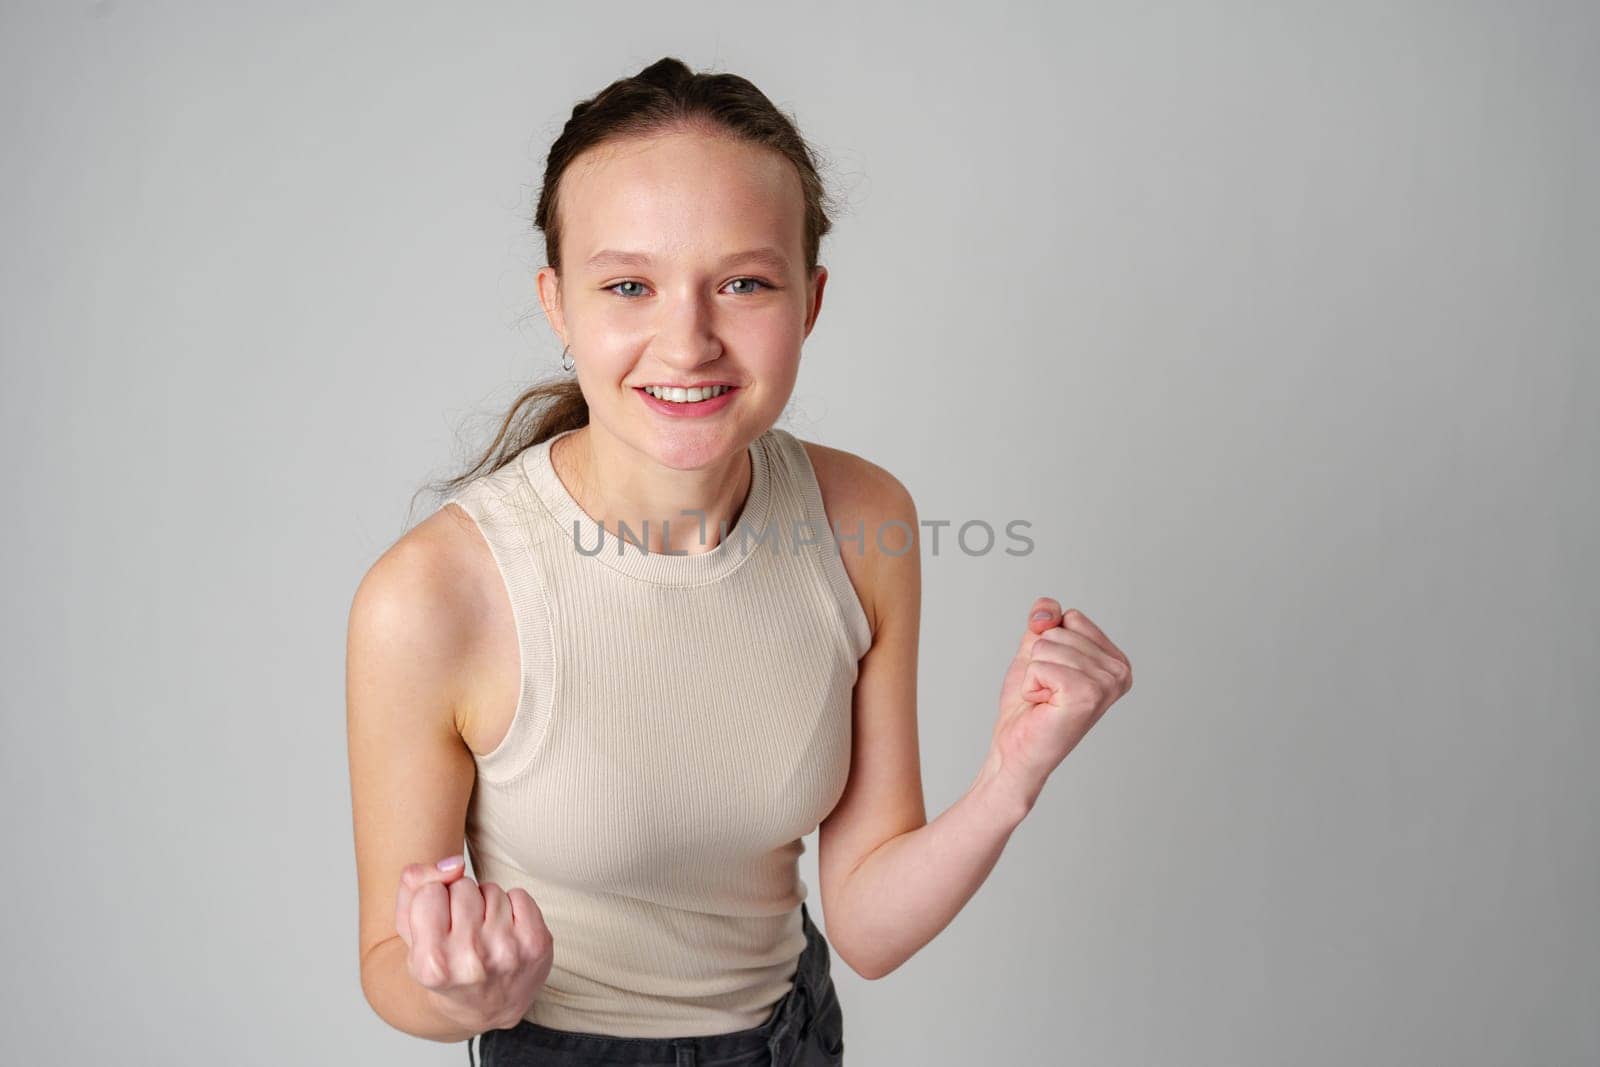 Young Woman in Casual Attire Smiling and Making a Fist Pump Gesture on a Plain Background close up